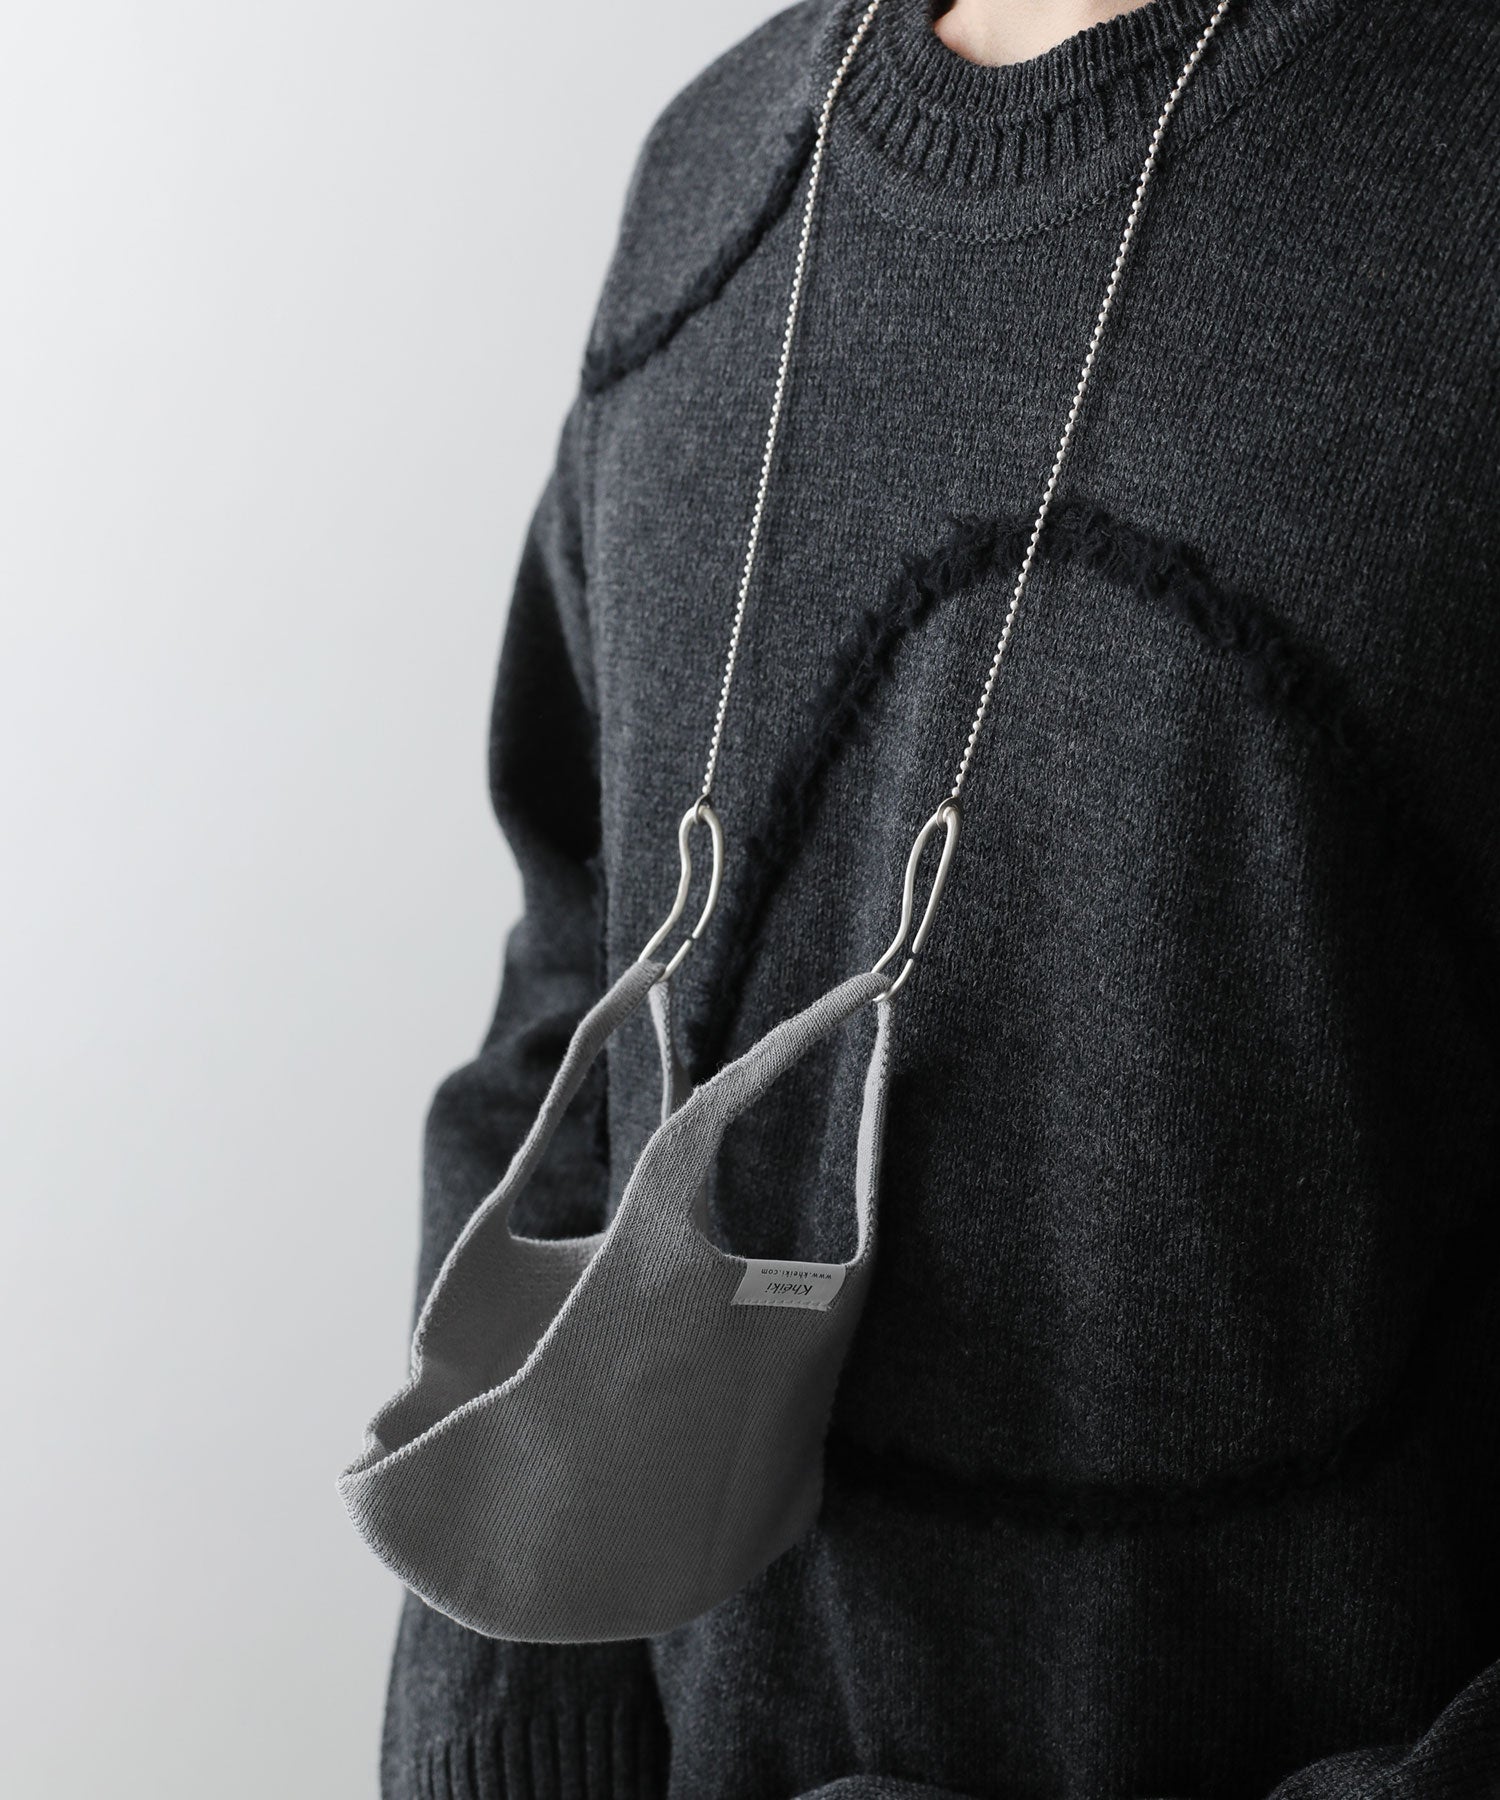 Khéiki ケイキ Chain Necklace +Ear Cuff +Knit Mask ニットマスクセット session セッション福岡セレクトショップ 公式通販サイト